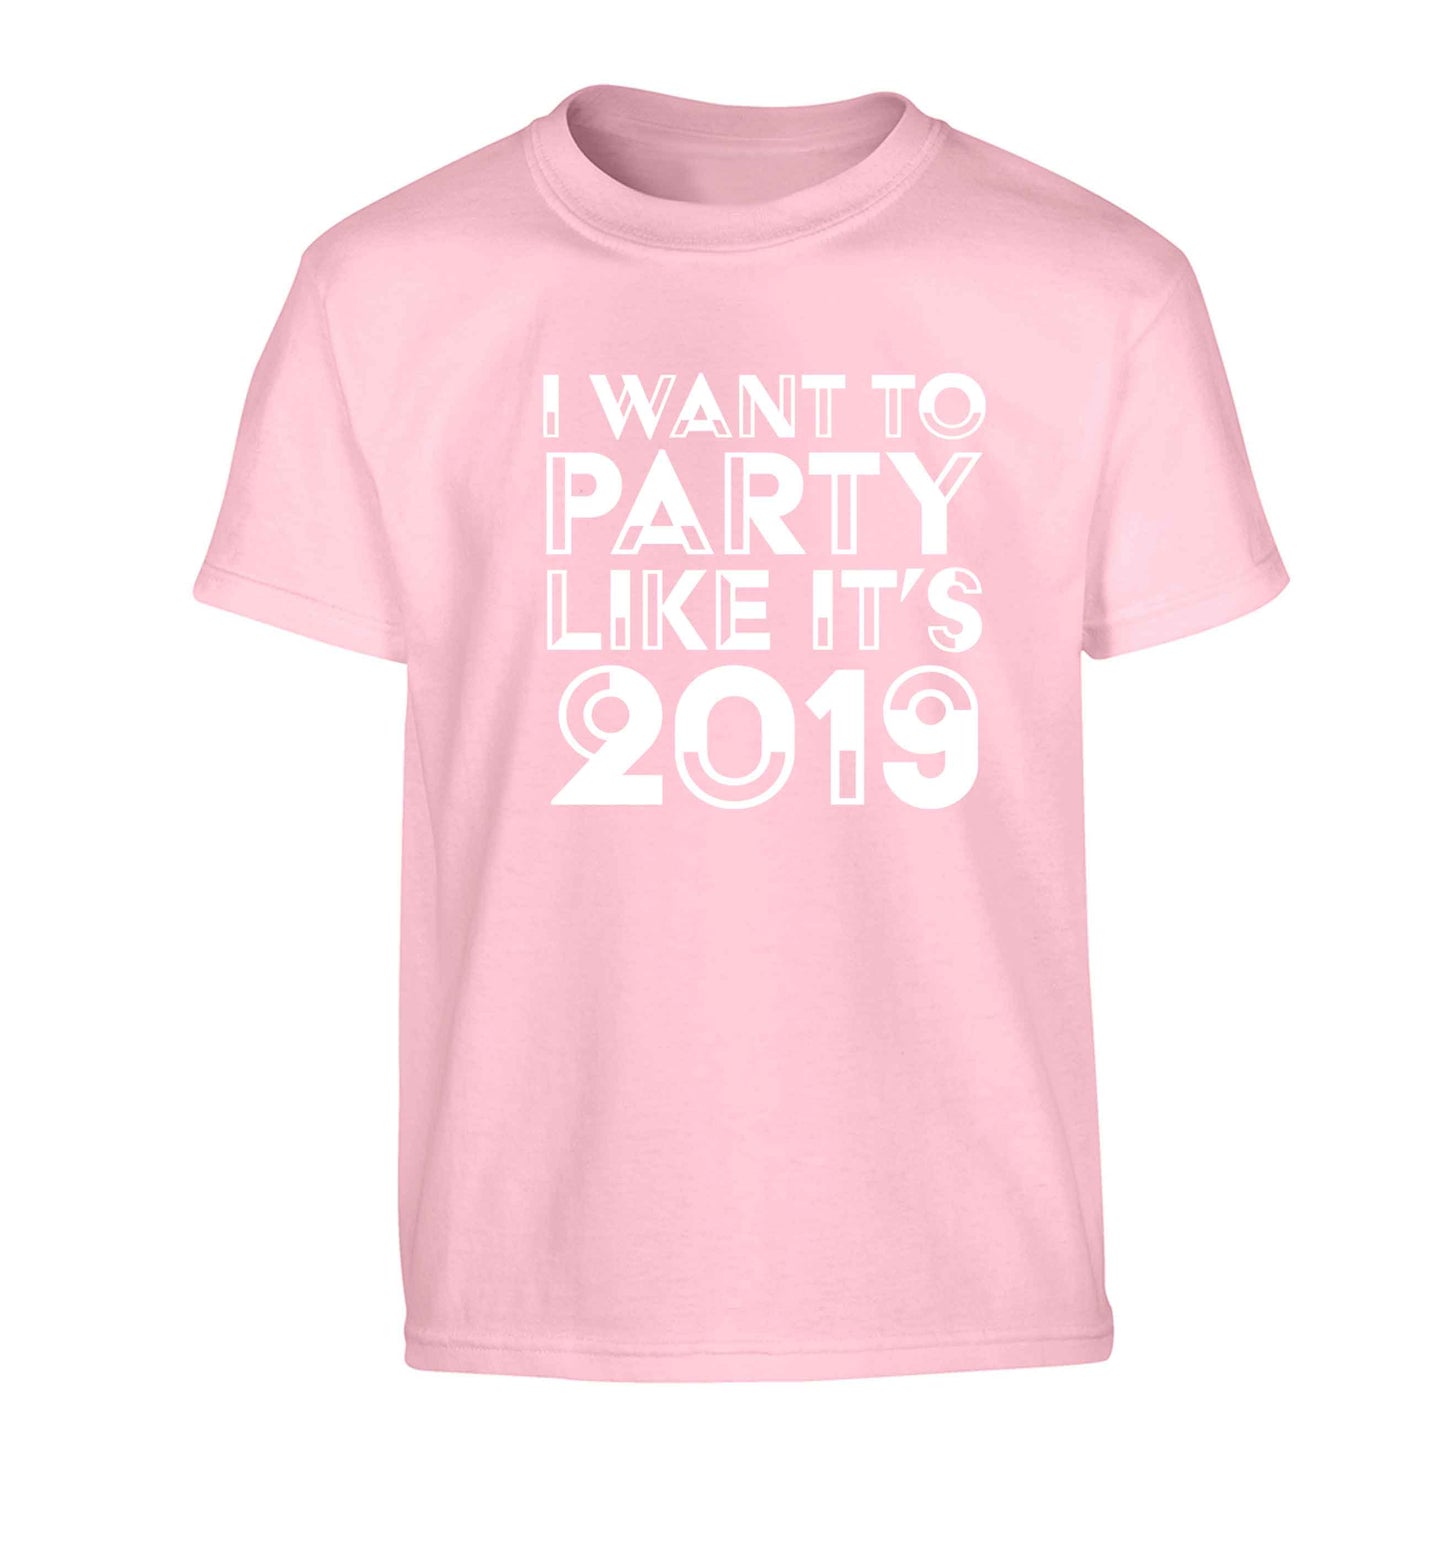 I want to party like it's 2019 Children's light pink Tshirt 12-13 Years